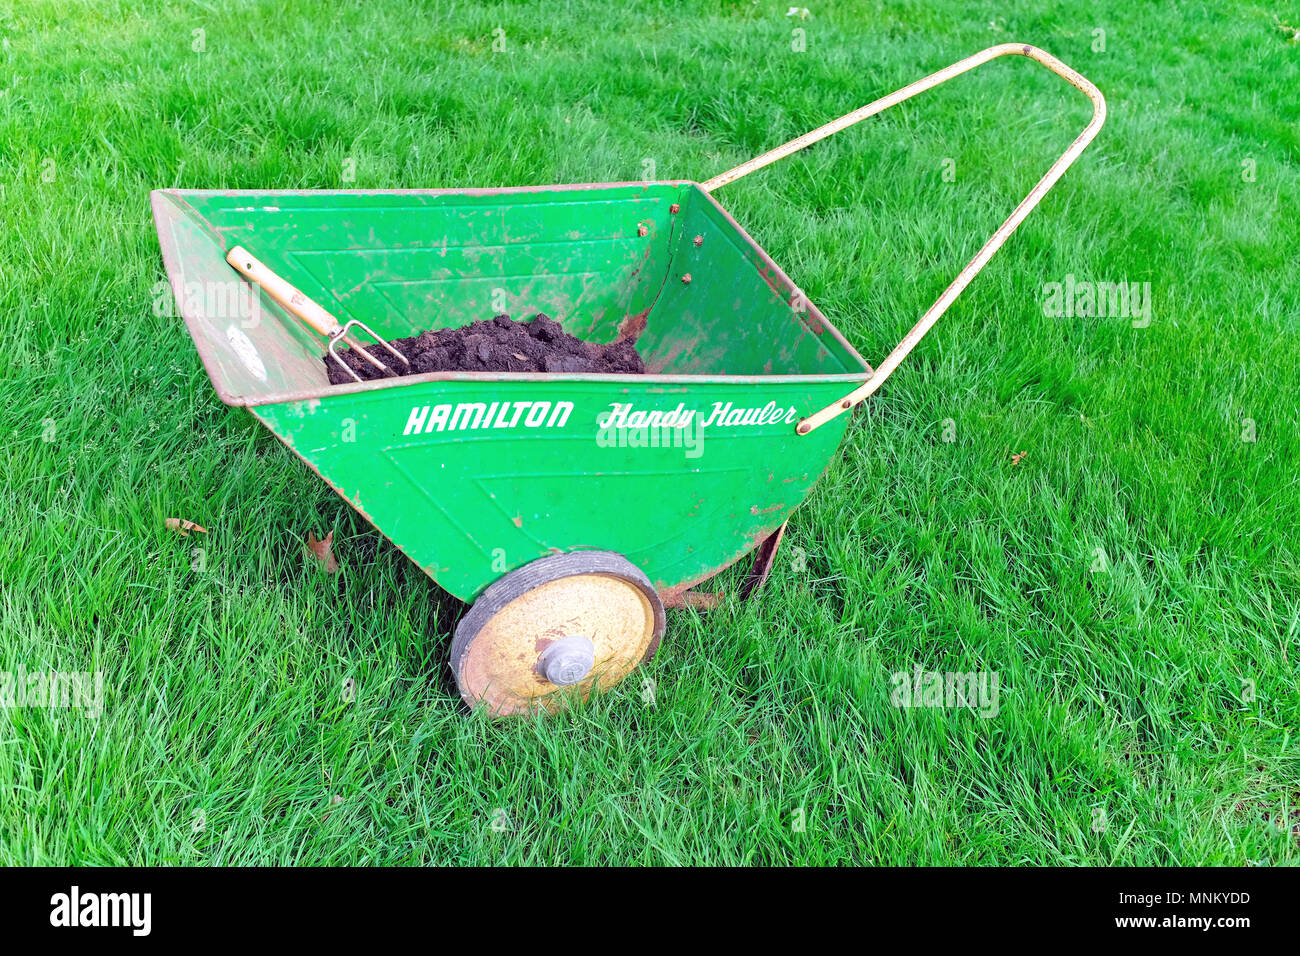 Bright green old Hamilton Handy Hauler with compost, soil, and a gardening tool inside. Stock Photo